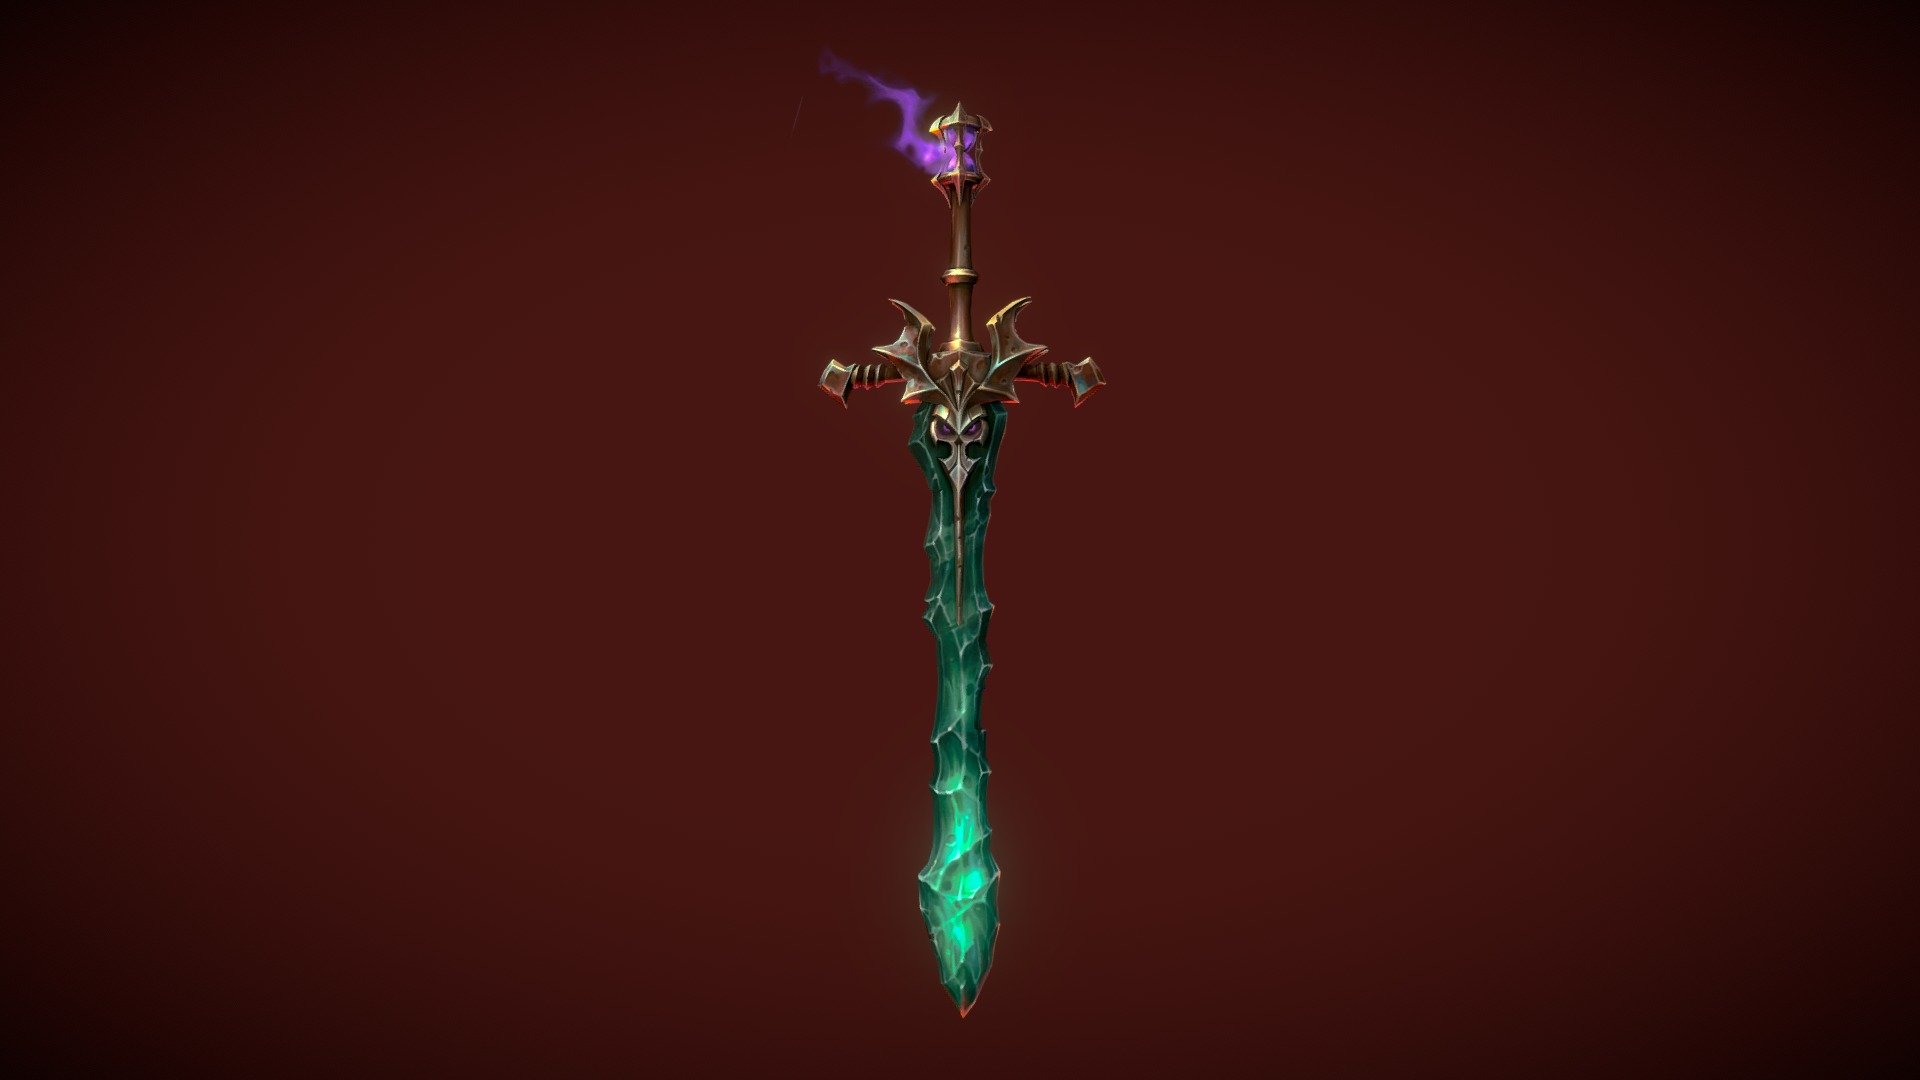 Another sword! But this time using one of Shem Dawson's amazing concepts. I've wanted to make this one for a while but only recently gotten round to it. As usual it was a lot of fun creating this and I hope you like it too!

Concept: https://www.artstation.com/artwork/B304V6

https://www.artstation.com/andrew_melfi - Nighthaunt Blade - 3D model by andrewmelfi 3d model